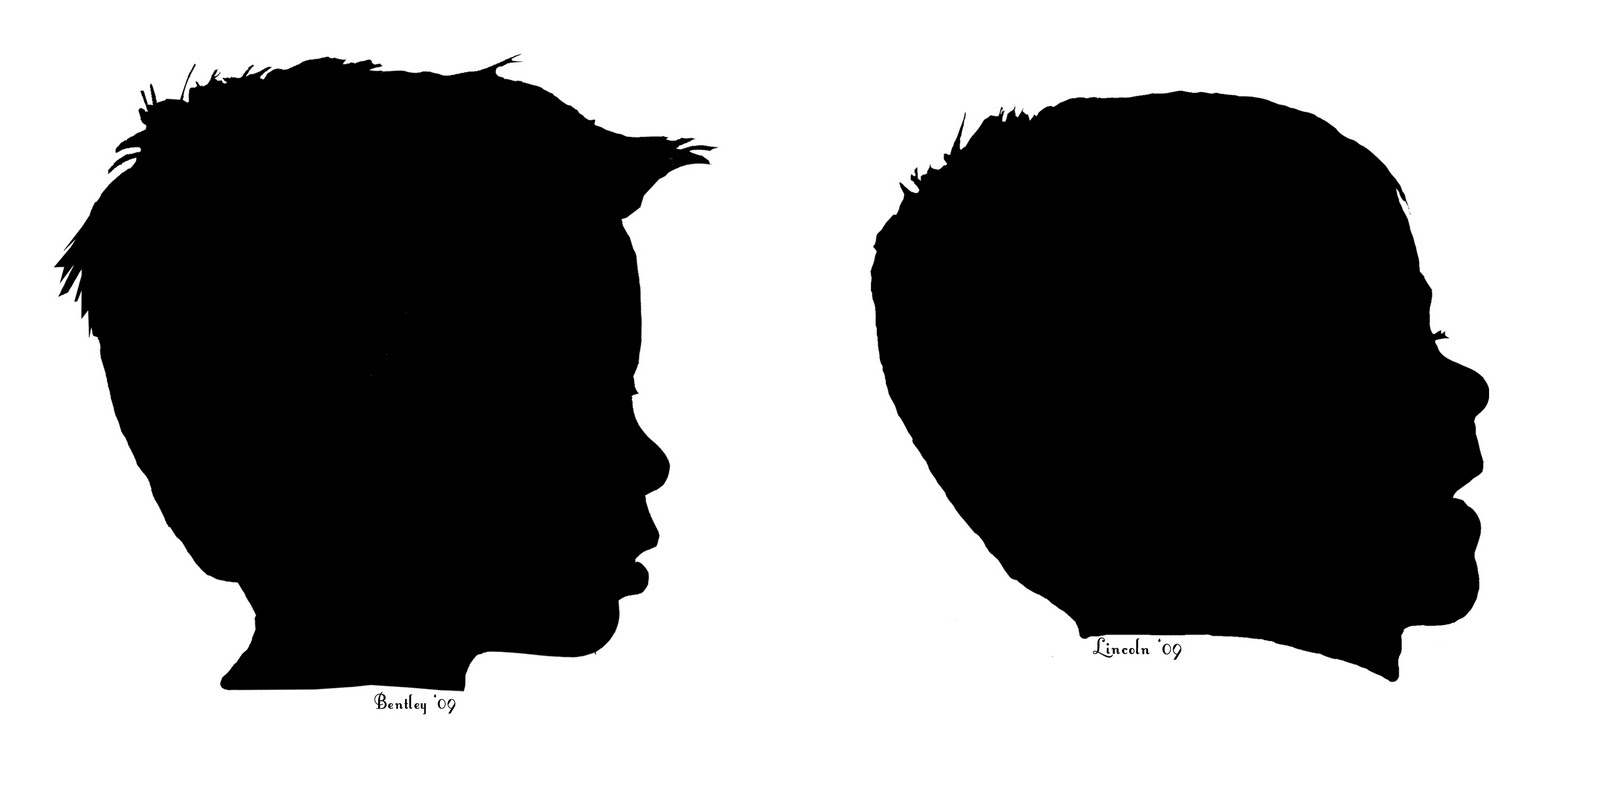 Face Silhouette   Clipart Best